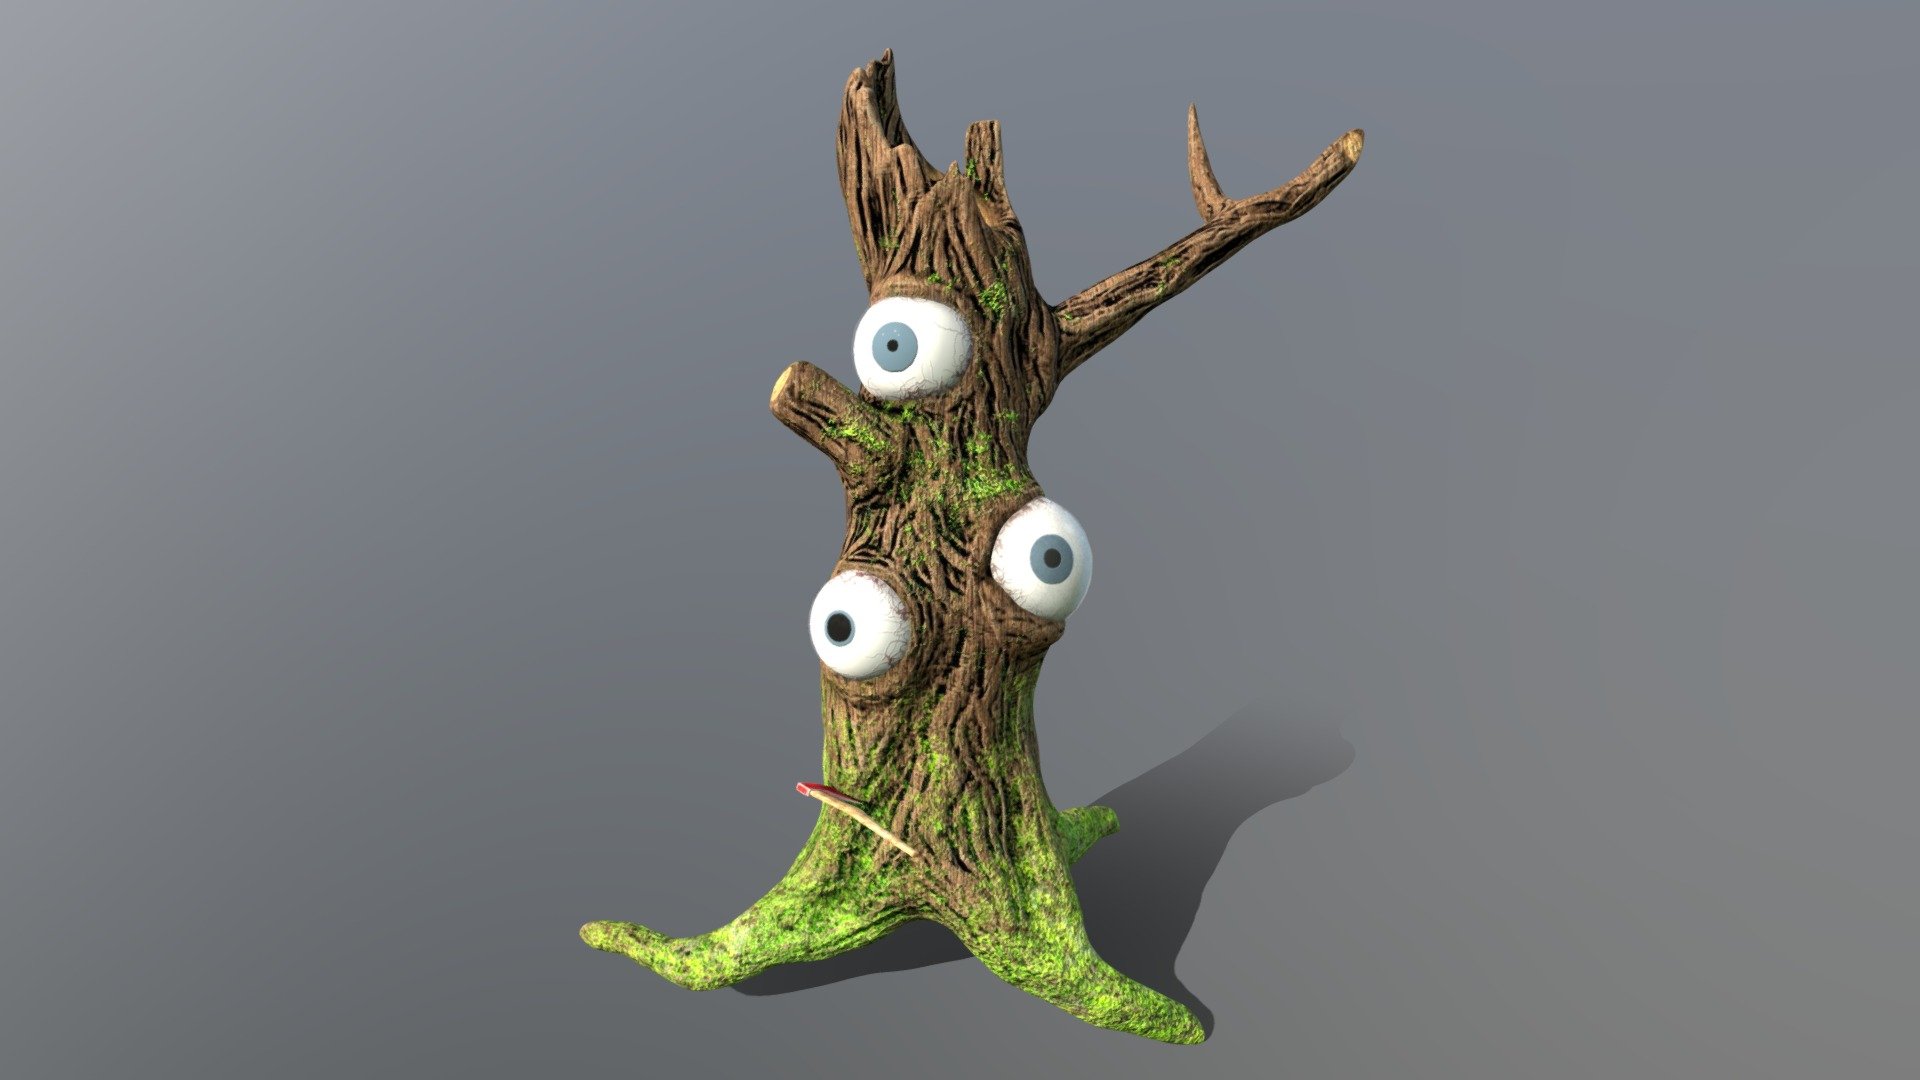 Tree monster is low-poly 3d model ready for Virtual Reality (VR), Augmented Reality (AR), games and other real-time apps.

Max Corona scene includes:
- 5 Object(s)
- 18 PNG textures at 4096x4096. All textures are PBR.

Max Vray scene:
- 5 Object(s)
- 18 PNG textures at 4096x4096. All textures are PBR.

Matlib archive includes:
-2 sets of textures,2048x2048 PNG,512x512 PNG - for each scene. All textures are PBR 3d model